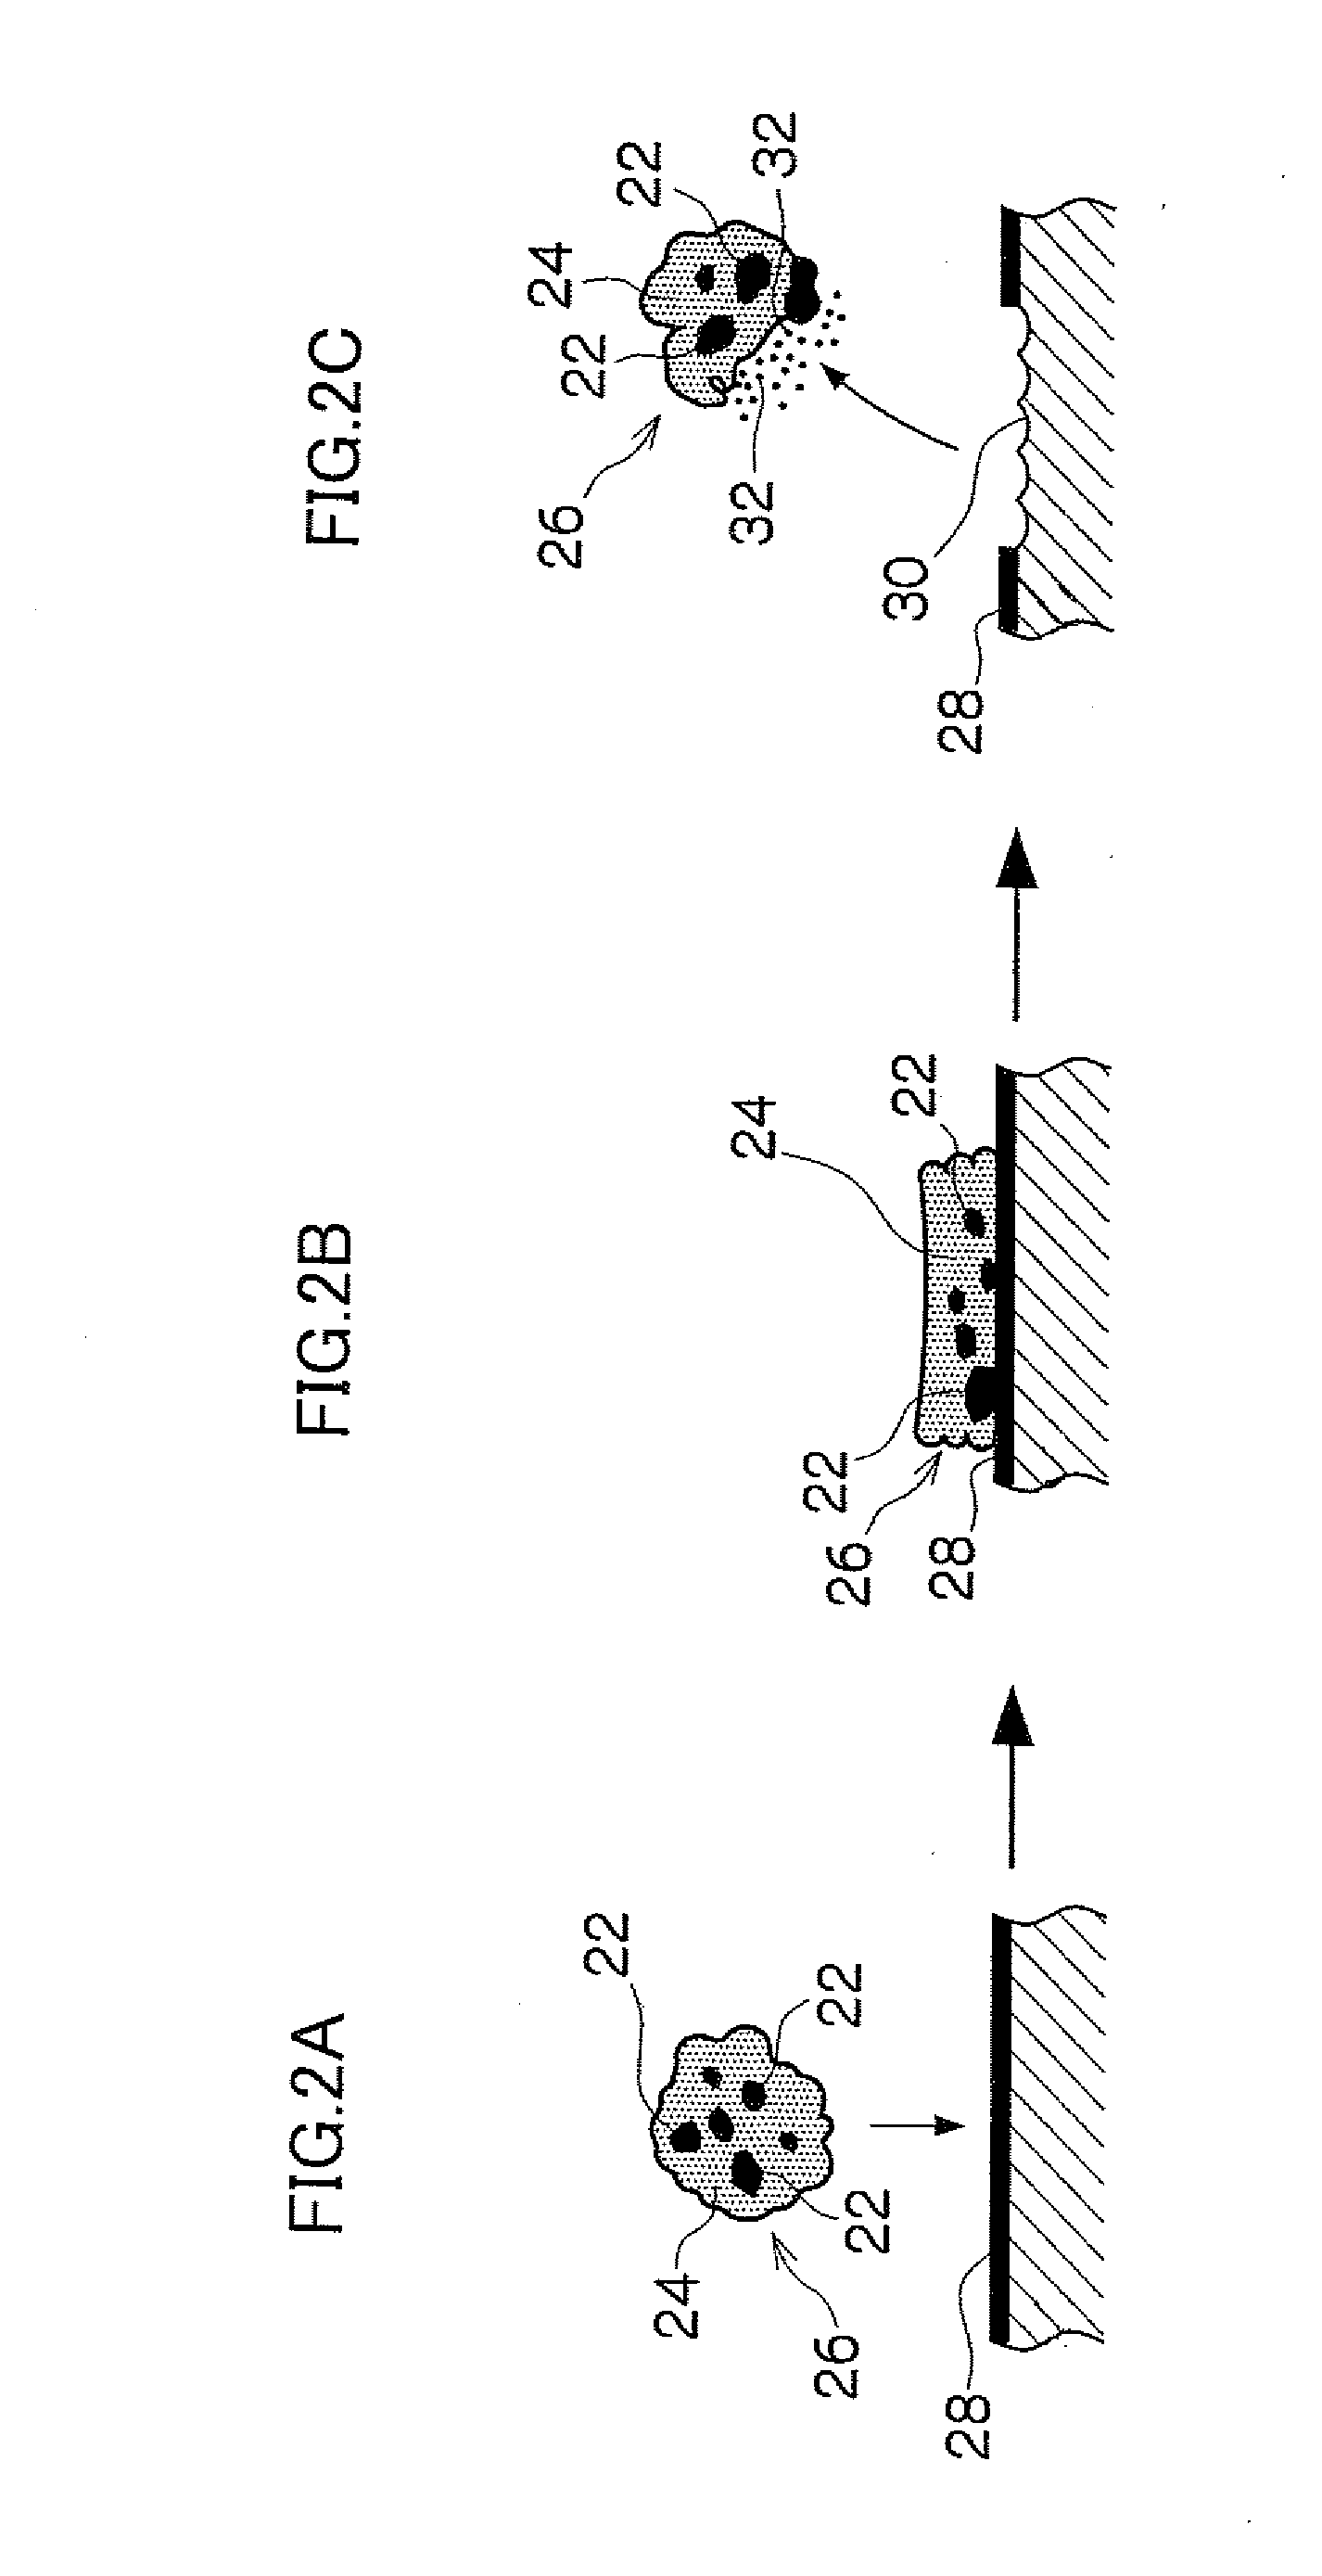 Blasting apparatus for outer surface of pipe